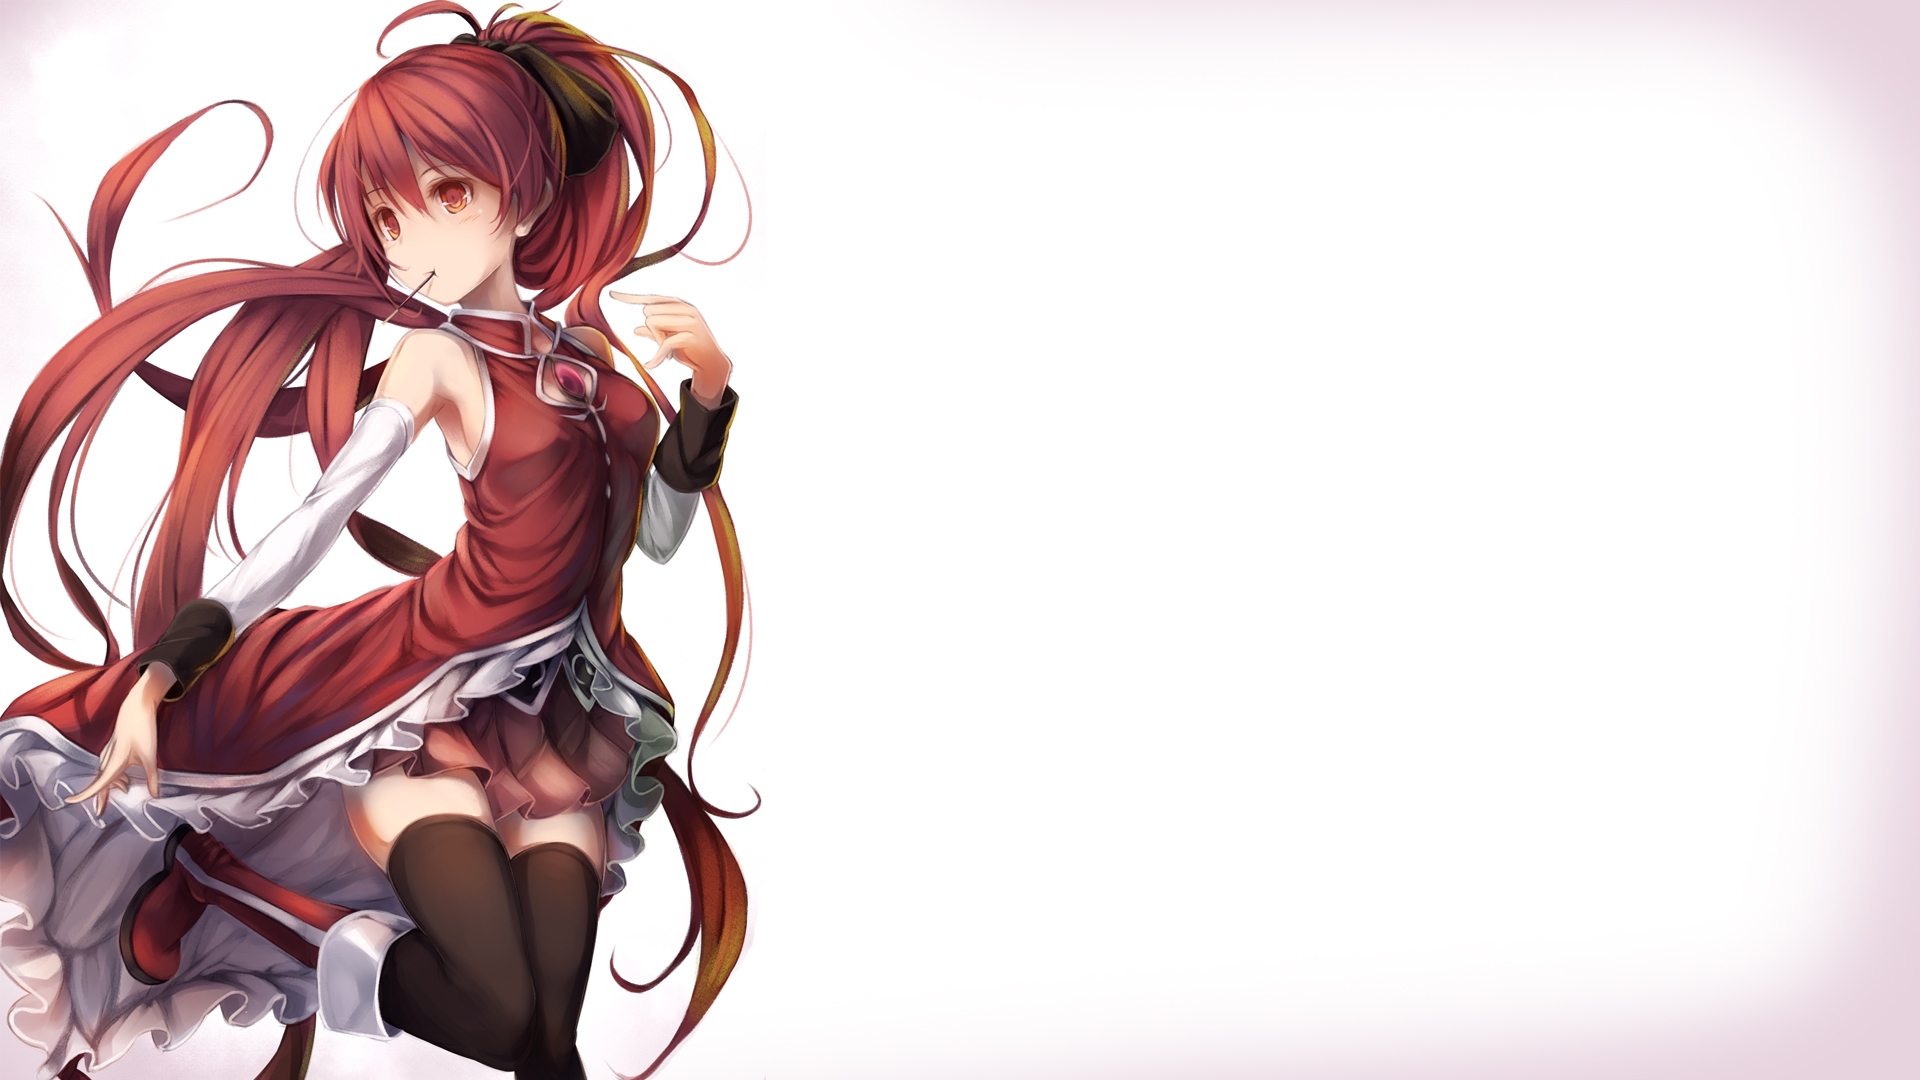 Red Haired Anime Warrior Woman - HD Wallpaper 